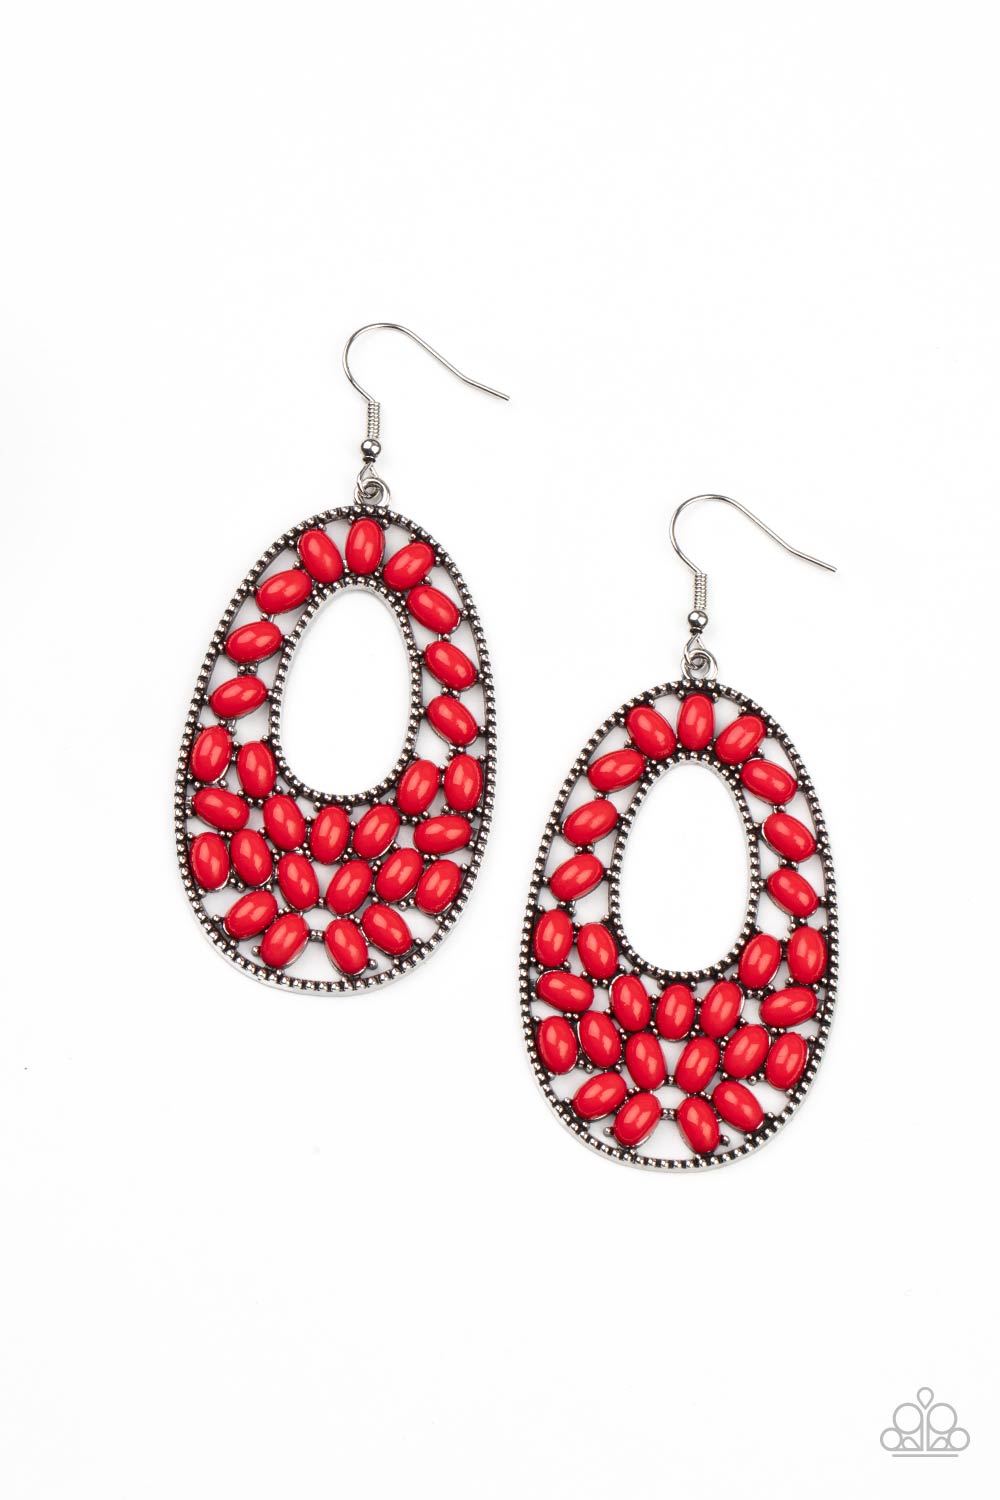 Beaded Shores - red - Paparazzi earrings